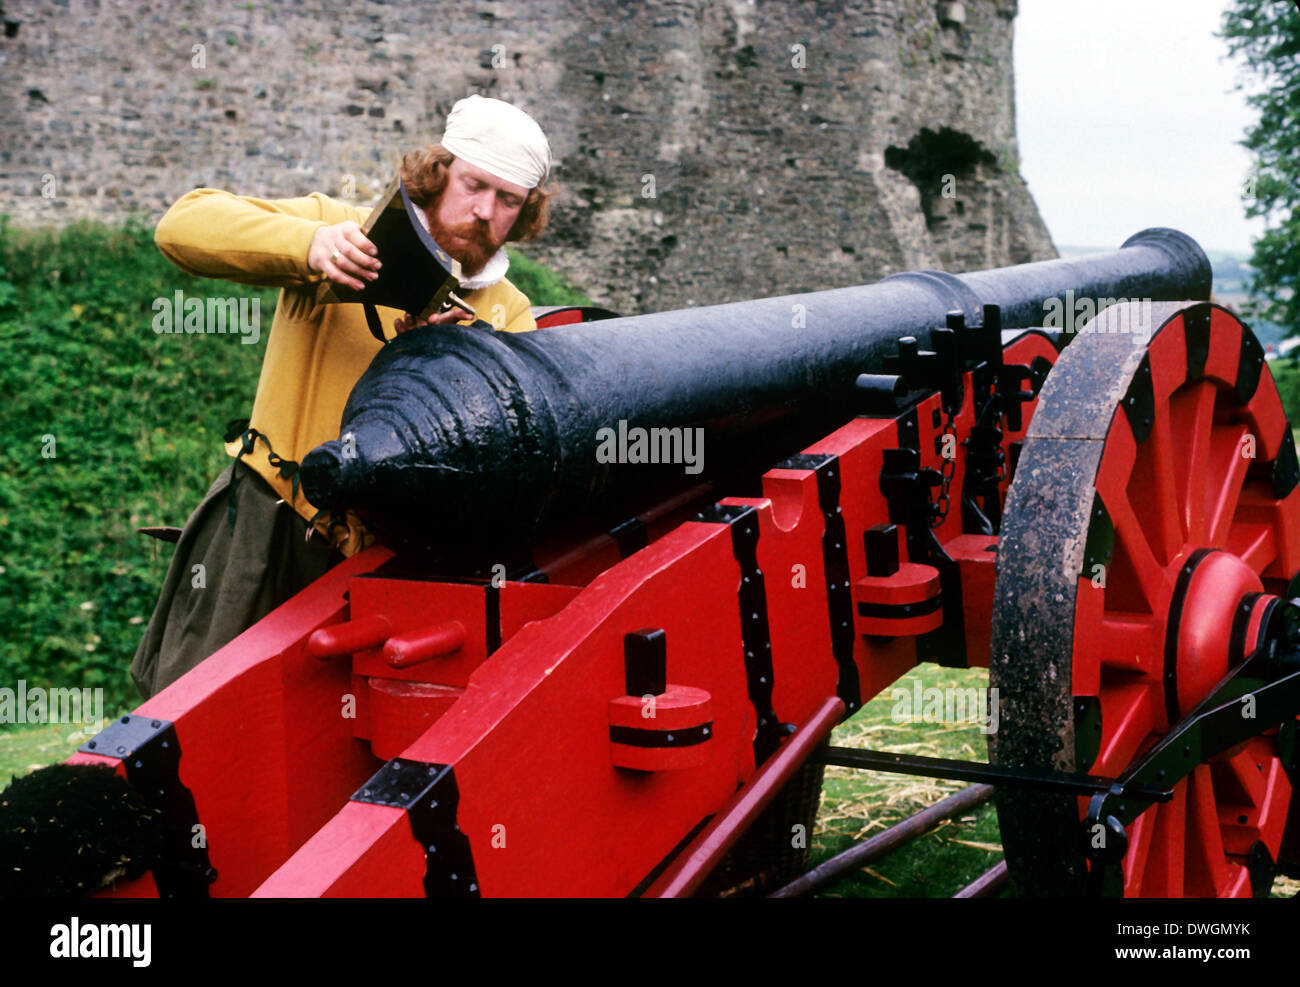 English Gunner loading cannon, Tudor Period 16th century, historical re-enactment weapons weaponry artillery Stock Photo